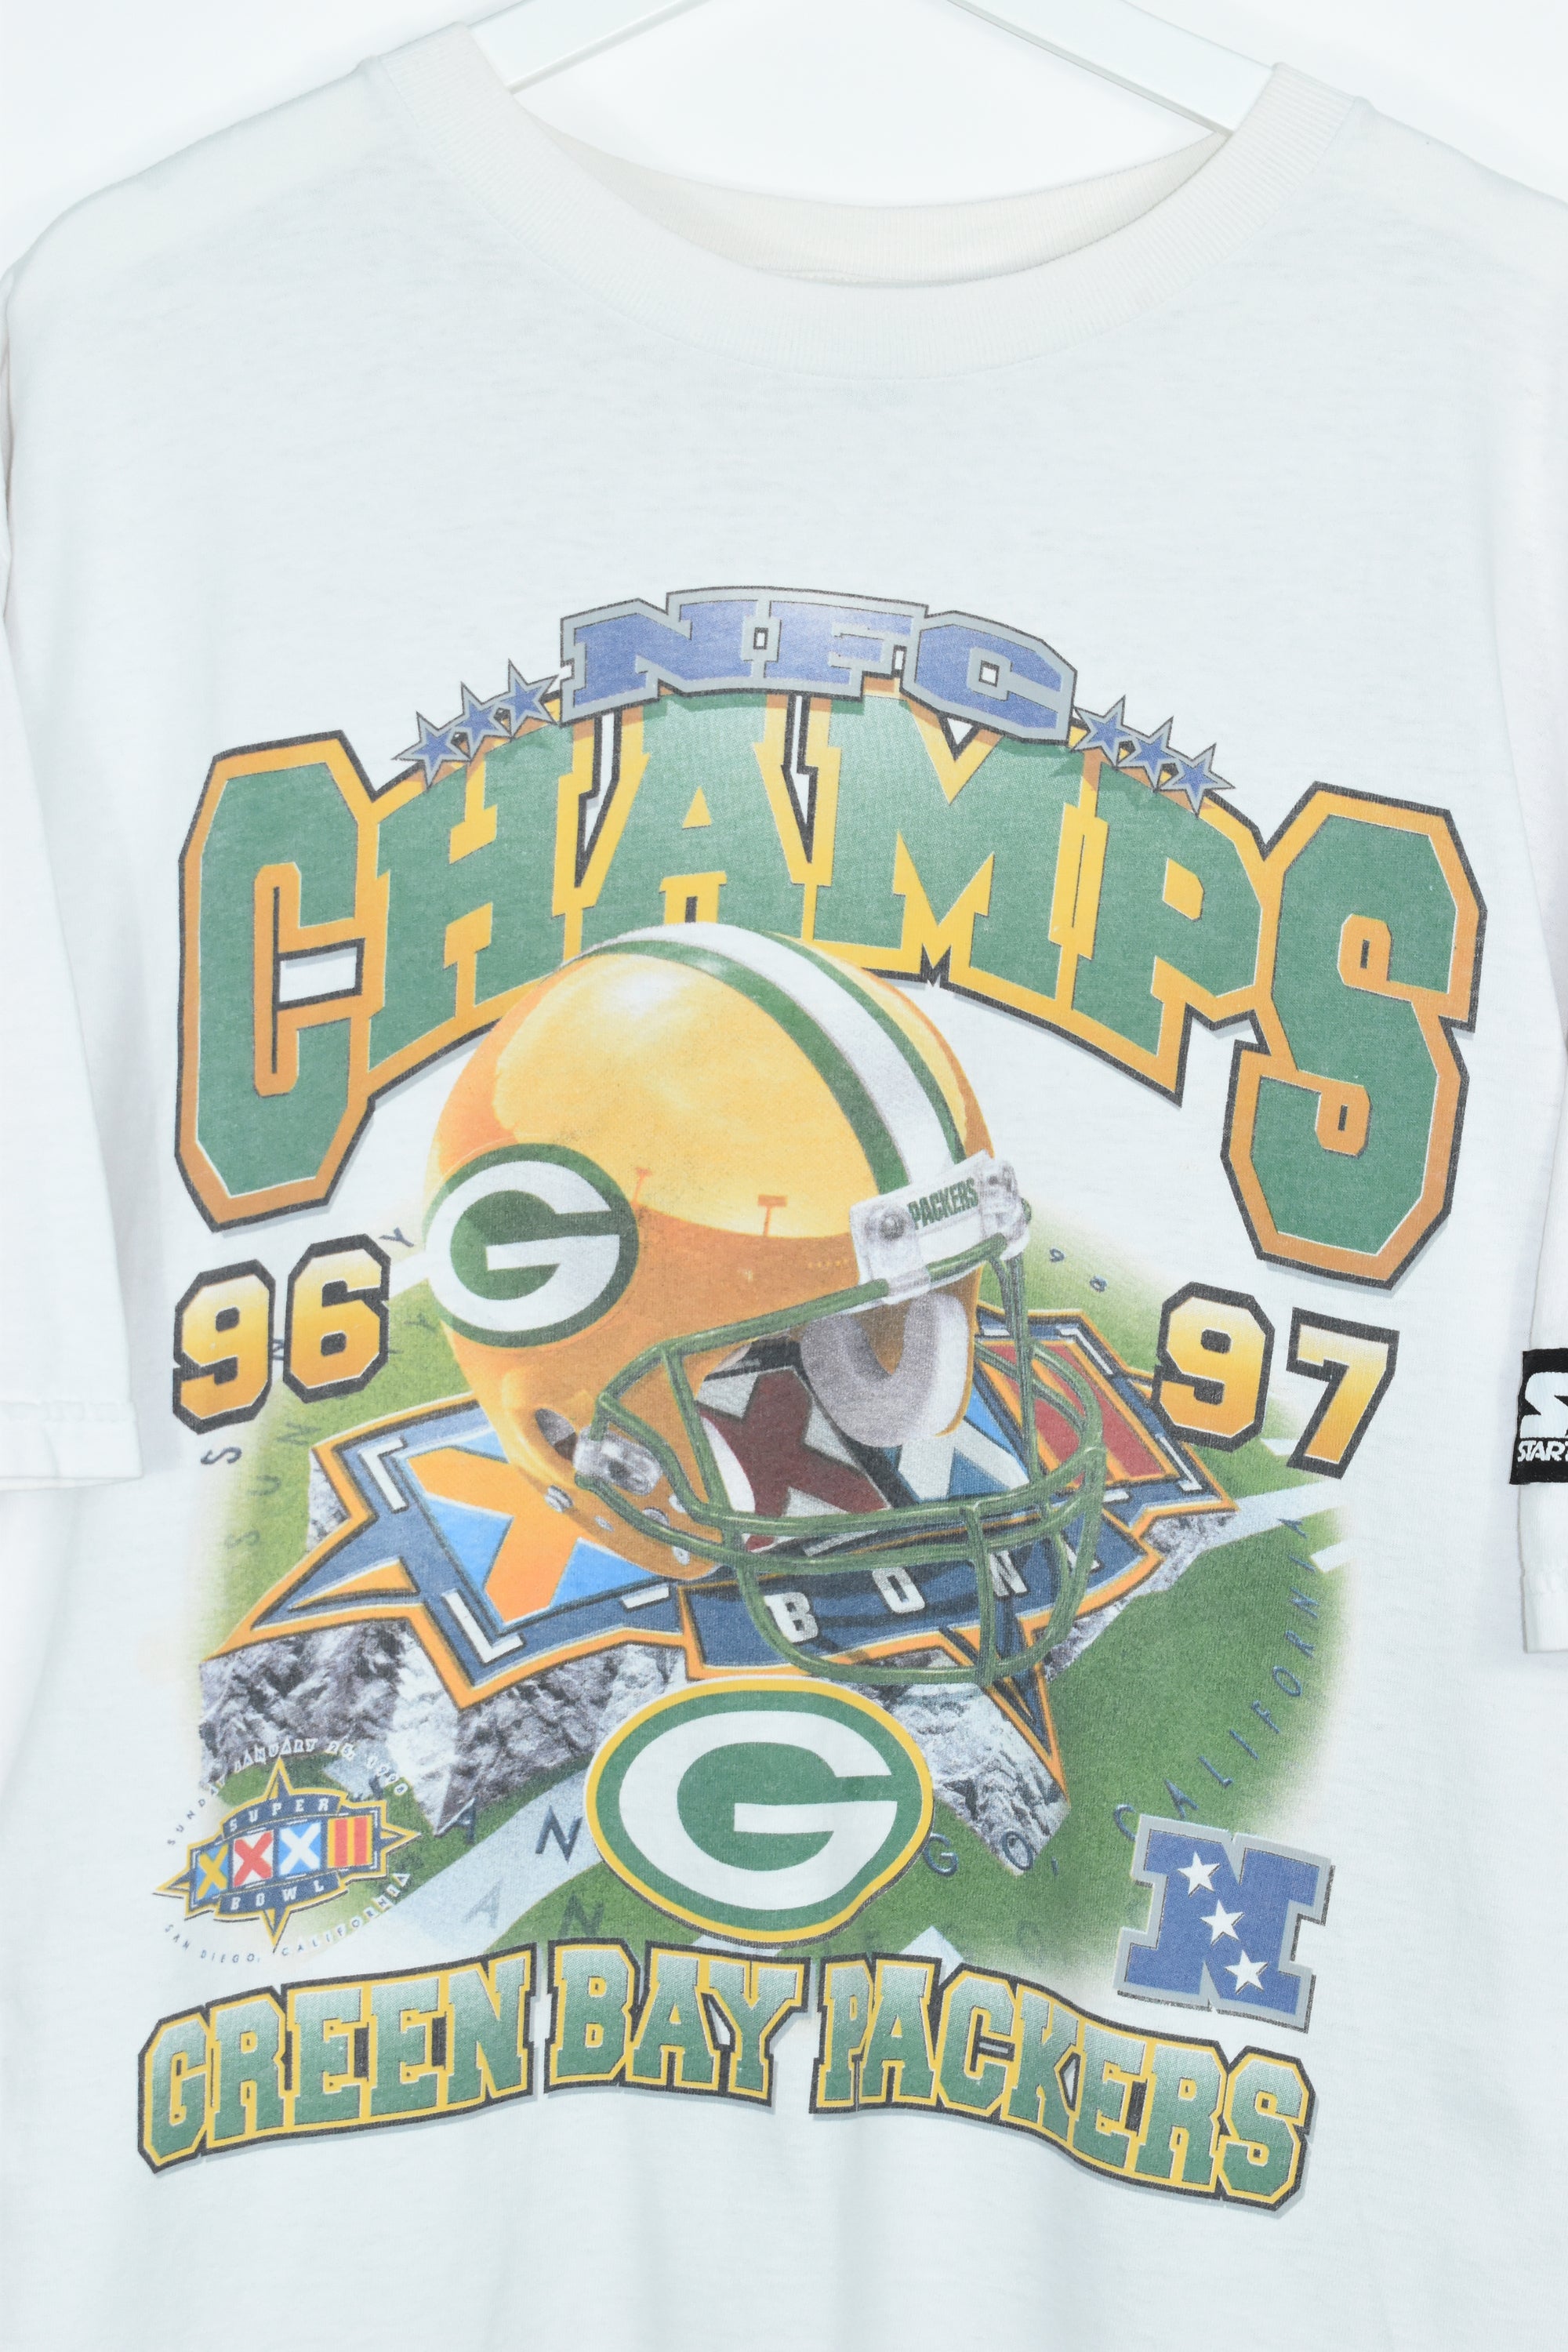 Vintage Green Bay Packers 96-97 Champs T Shirt Xlarge